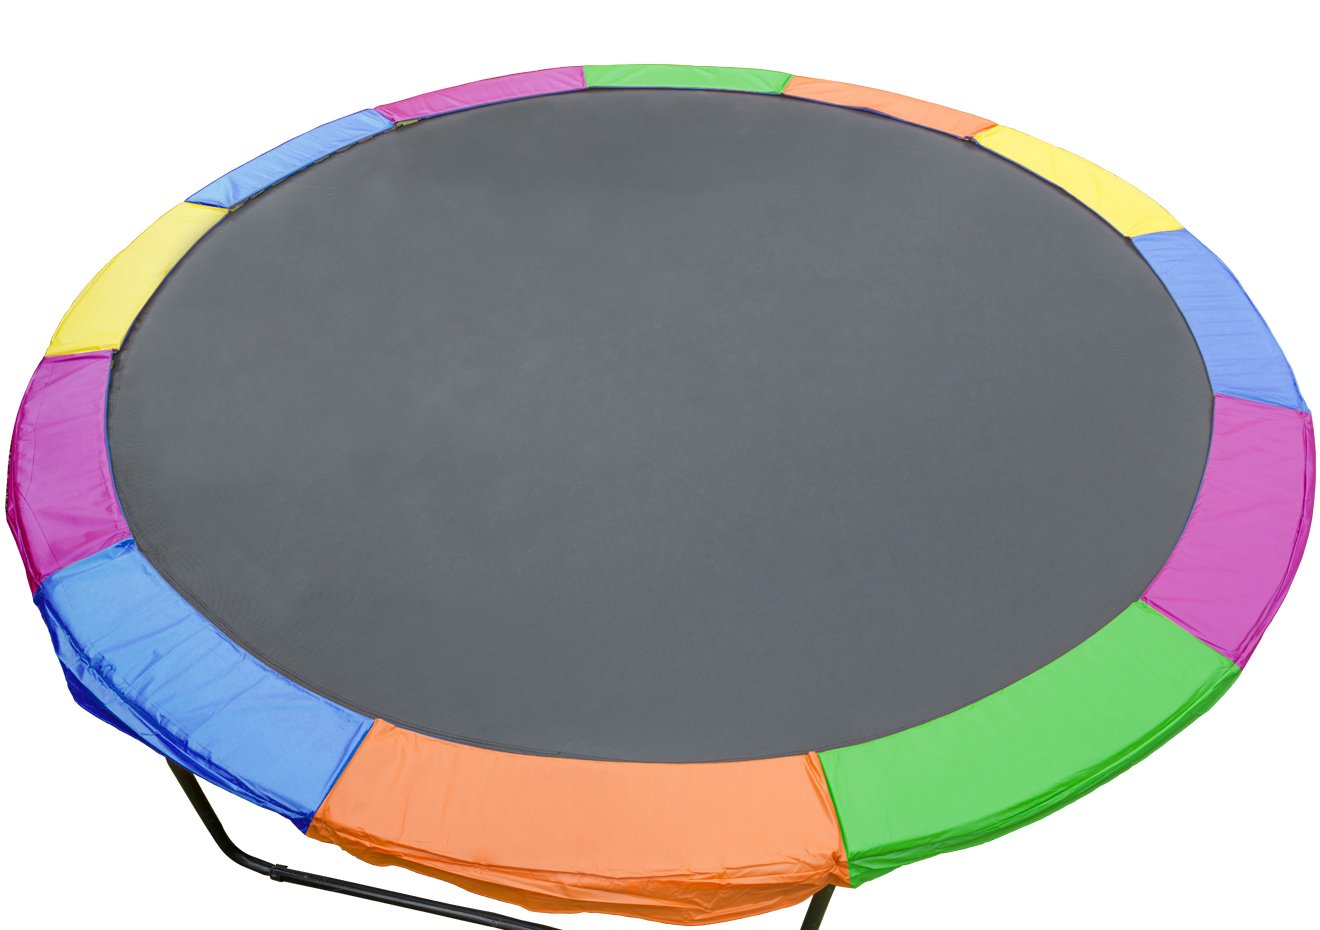 Replacement Trampoline Pad Reinforced Outdoor Round Spring Cover 14ft